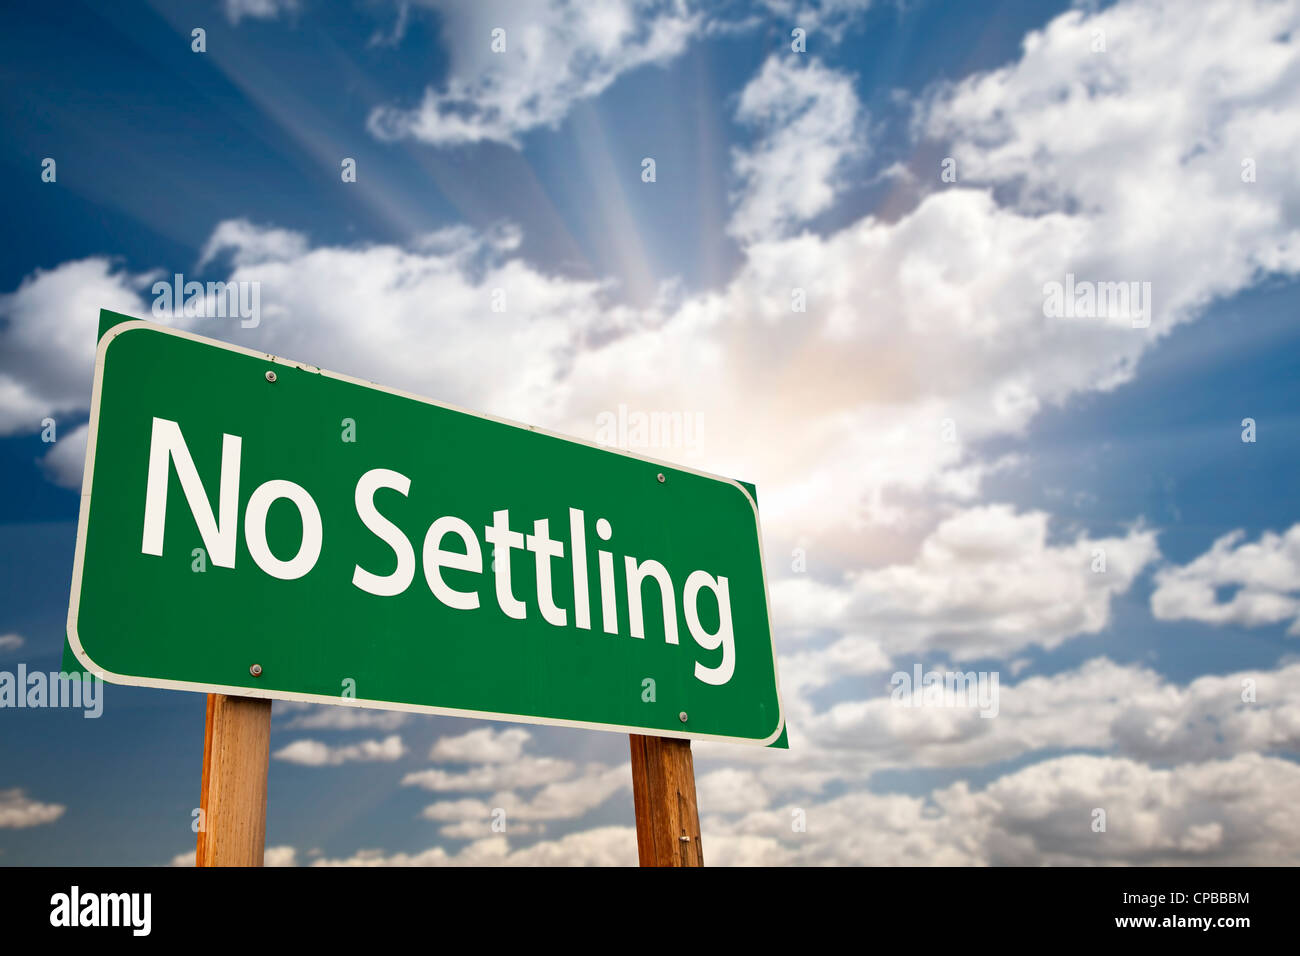 No Settling Green Road Sign with Dramatic Clouds, Sun Rays and Sky. Stock Photo